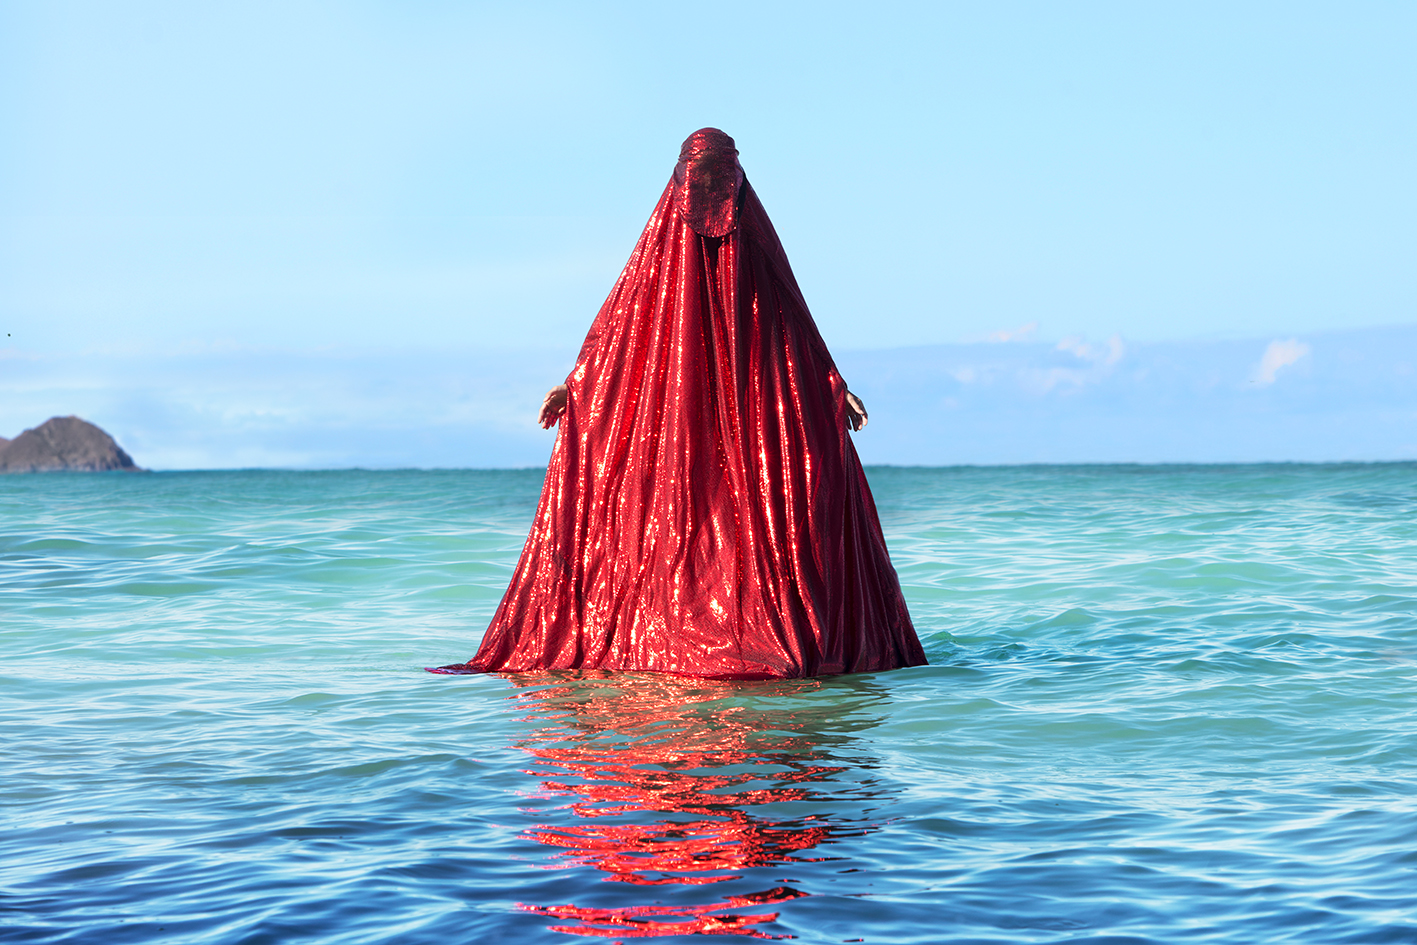 a figure fully covered in a bright, sparkling red chador emerges from blue ocean water. The red chador reflects upon the ripples of the water.